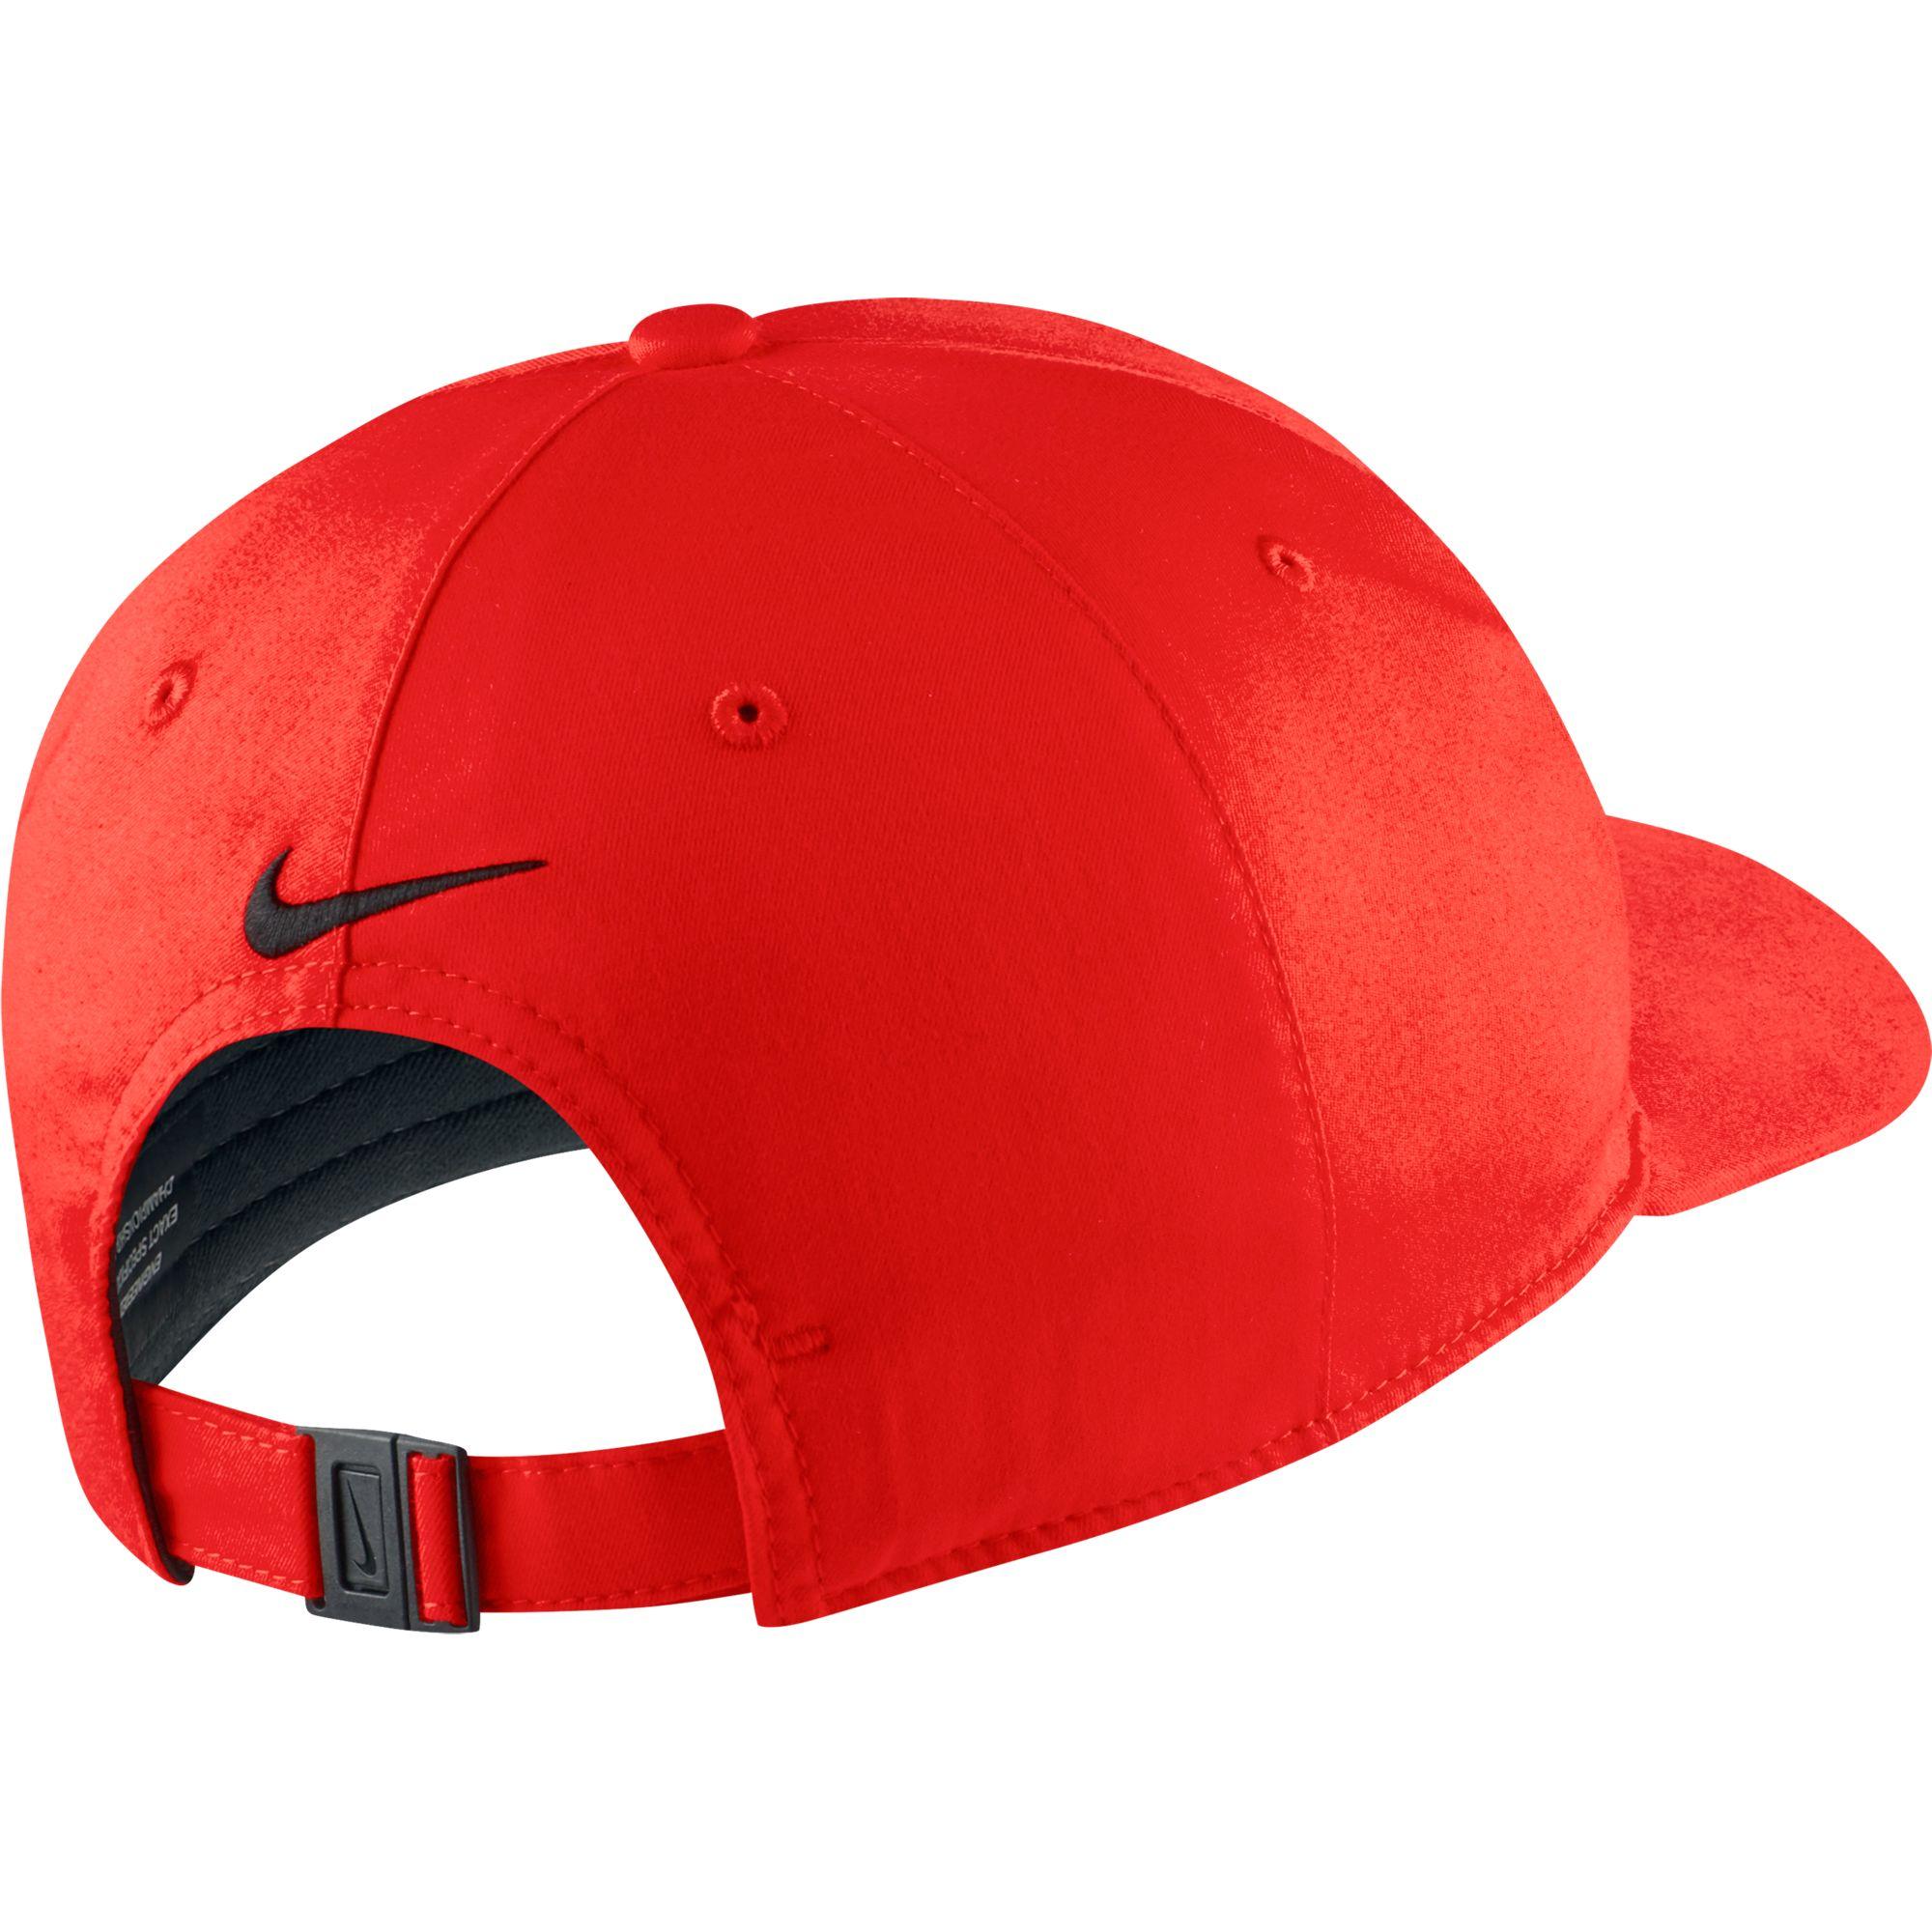 Nike Cotton Aerobill Classic99 Golf Hat in Red for Men - Lyst